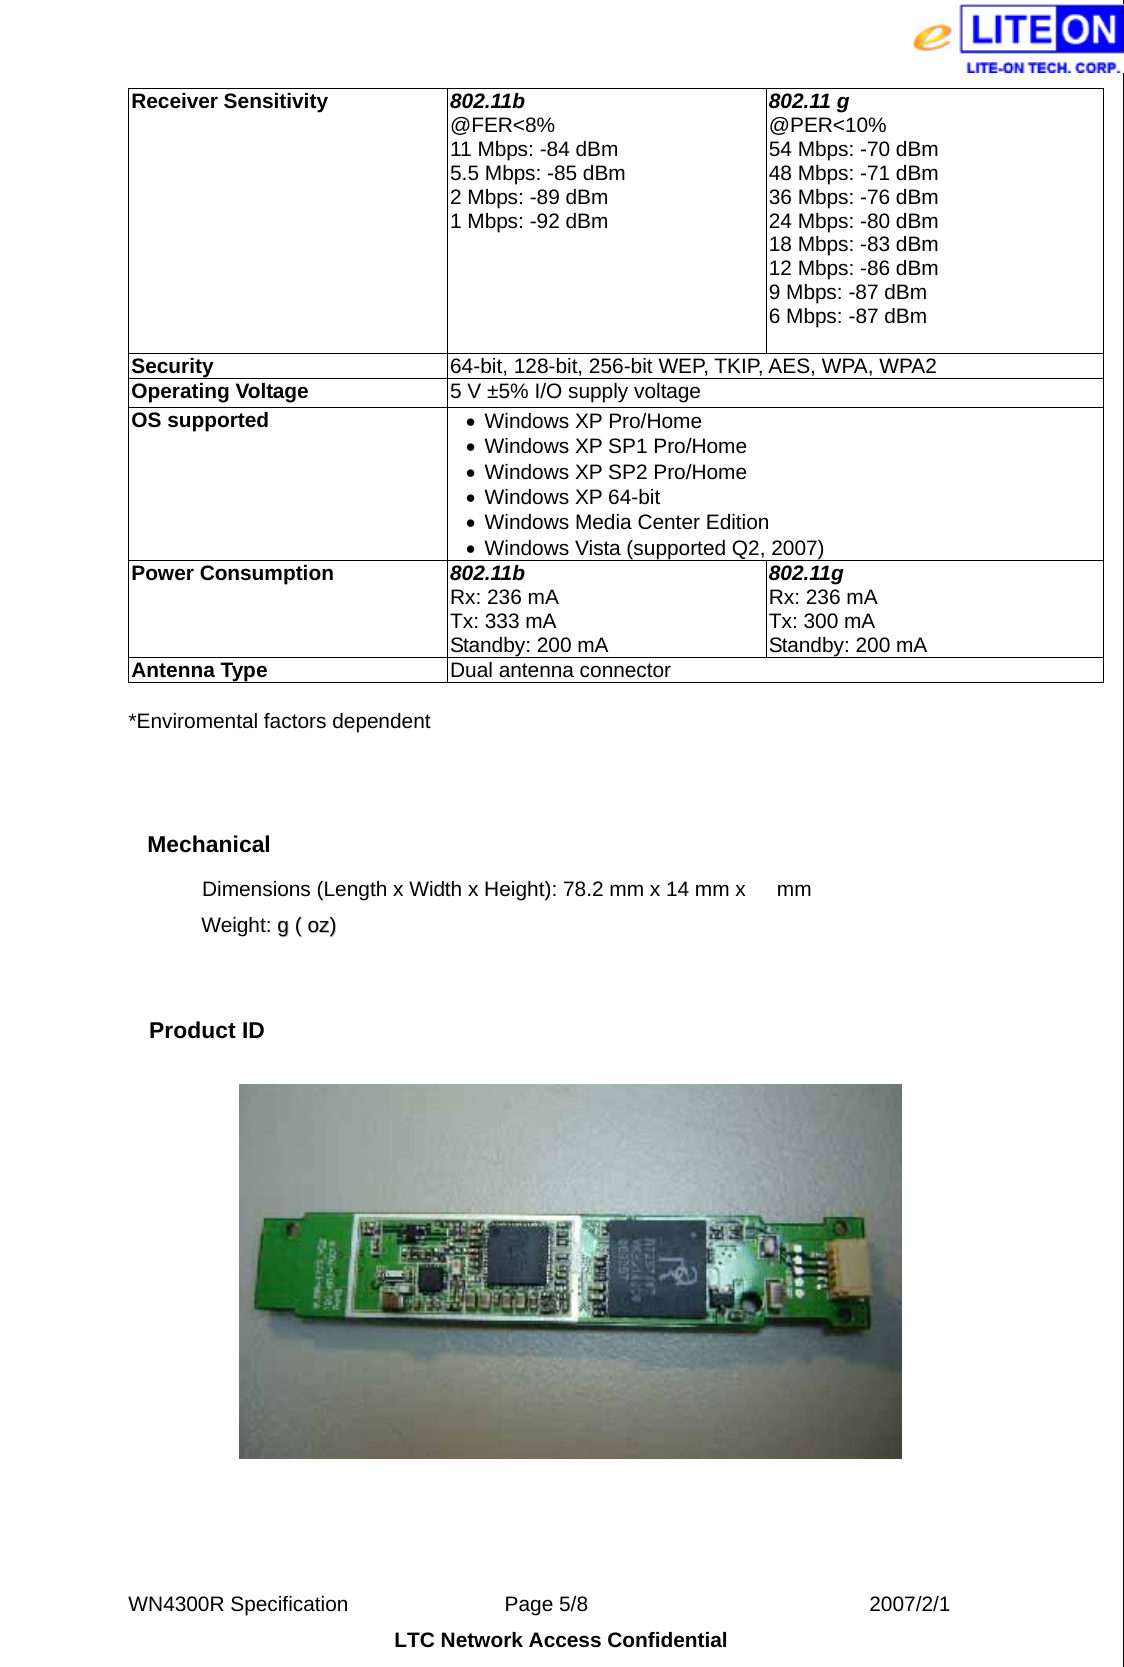  WN4300R Specification               Page 5/8                           2007/2/1 LTC Network Access Confidential Receiver Sensitivity  802.11b @FER&lt;8% 11 Mbps: -84 dBm 5.5 Mbps: -85 dBm 2 Mbps: -89 dBm 1 Mbps: -92 dBm 802.11 g @PER&lt;10% 54 Mbps: -70 dBm 48 Mbps: -71 dBm 36 Mbps: -76 dBm 24 Mbps: -80 dBm 18 Mbps: -83 dBm 12 Mbps: -86 dBm 9 Mbps: -87 dBm 6 Mbps: -87 dBm Security  64-bit, 128-bit, 256-bit WEP, TKIP, AES, WPA, WPA2 Operating Voltage  5 V ±5% I/O supply voltage OS supported  •  Windows XP Pro/Home •  Windows XP SP1 Pro/Home •  Windows XP SP2 Pro/Home •  Windows XP 64-bit •  Windows Media Center Edition •  Windows Vista (supported Q2, 2007) Power Consumption  802.11b Rx: 236 mA Tx: 333 mA Standby: 200 mA 802.11g Rx: 236 mA Tx: 300 mA Standby: 200 mA Antenna Type  Dual antenna connector *Enviromental factors dependent  Mechanical Dimensions (Length x Width x Height):  78.2 mm x 14 mm x      mm   Weight:  gg  ((  oozz))    Product ID     